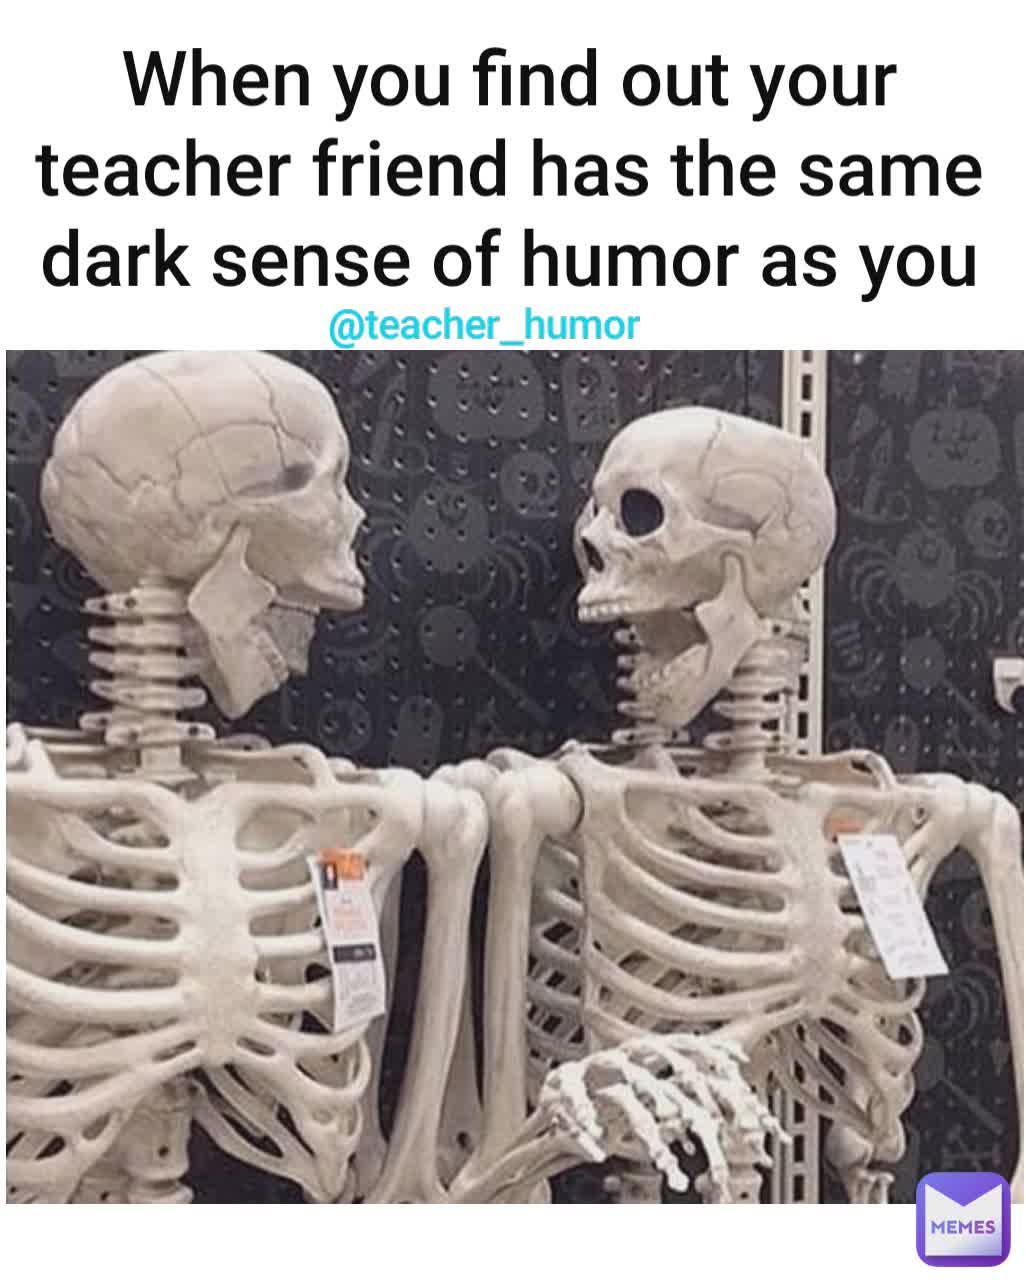 @teacher_humor  When you find out your teacher friend has the same dark sense of humor as you